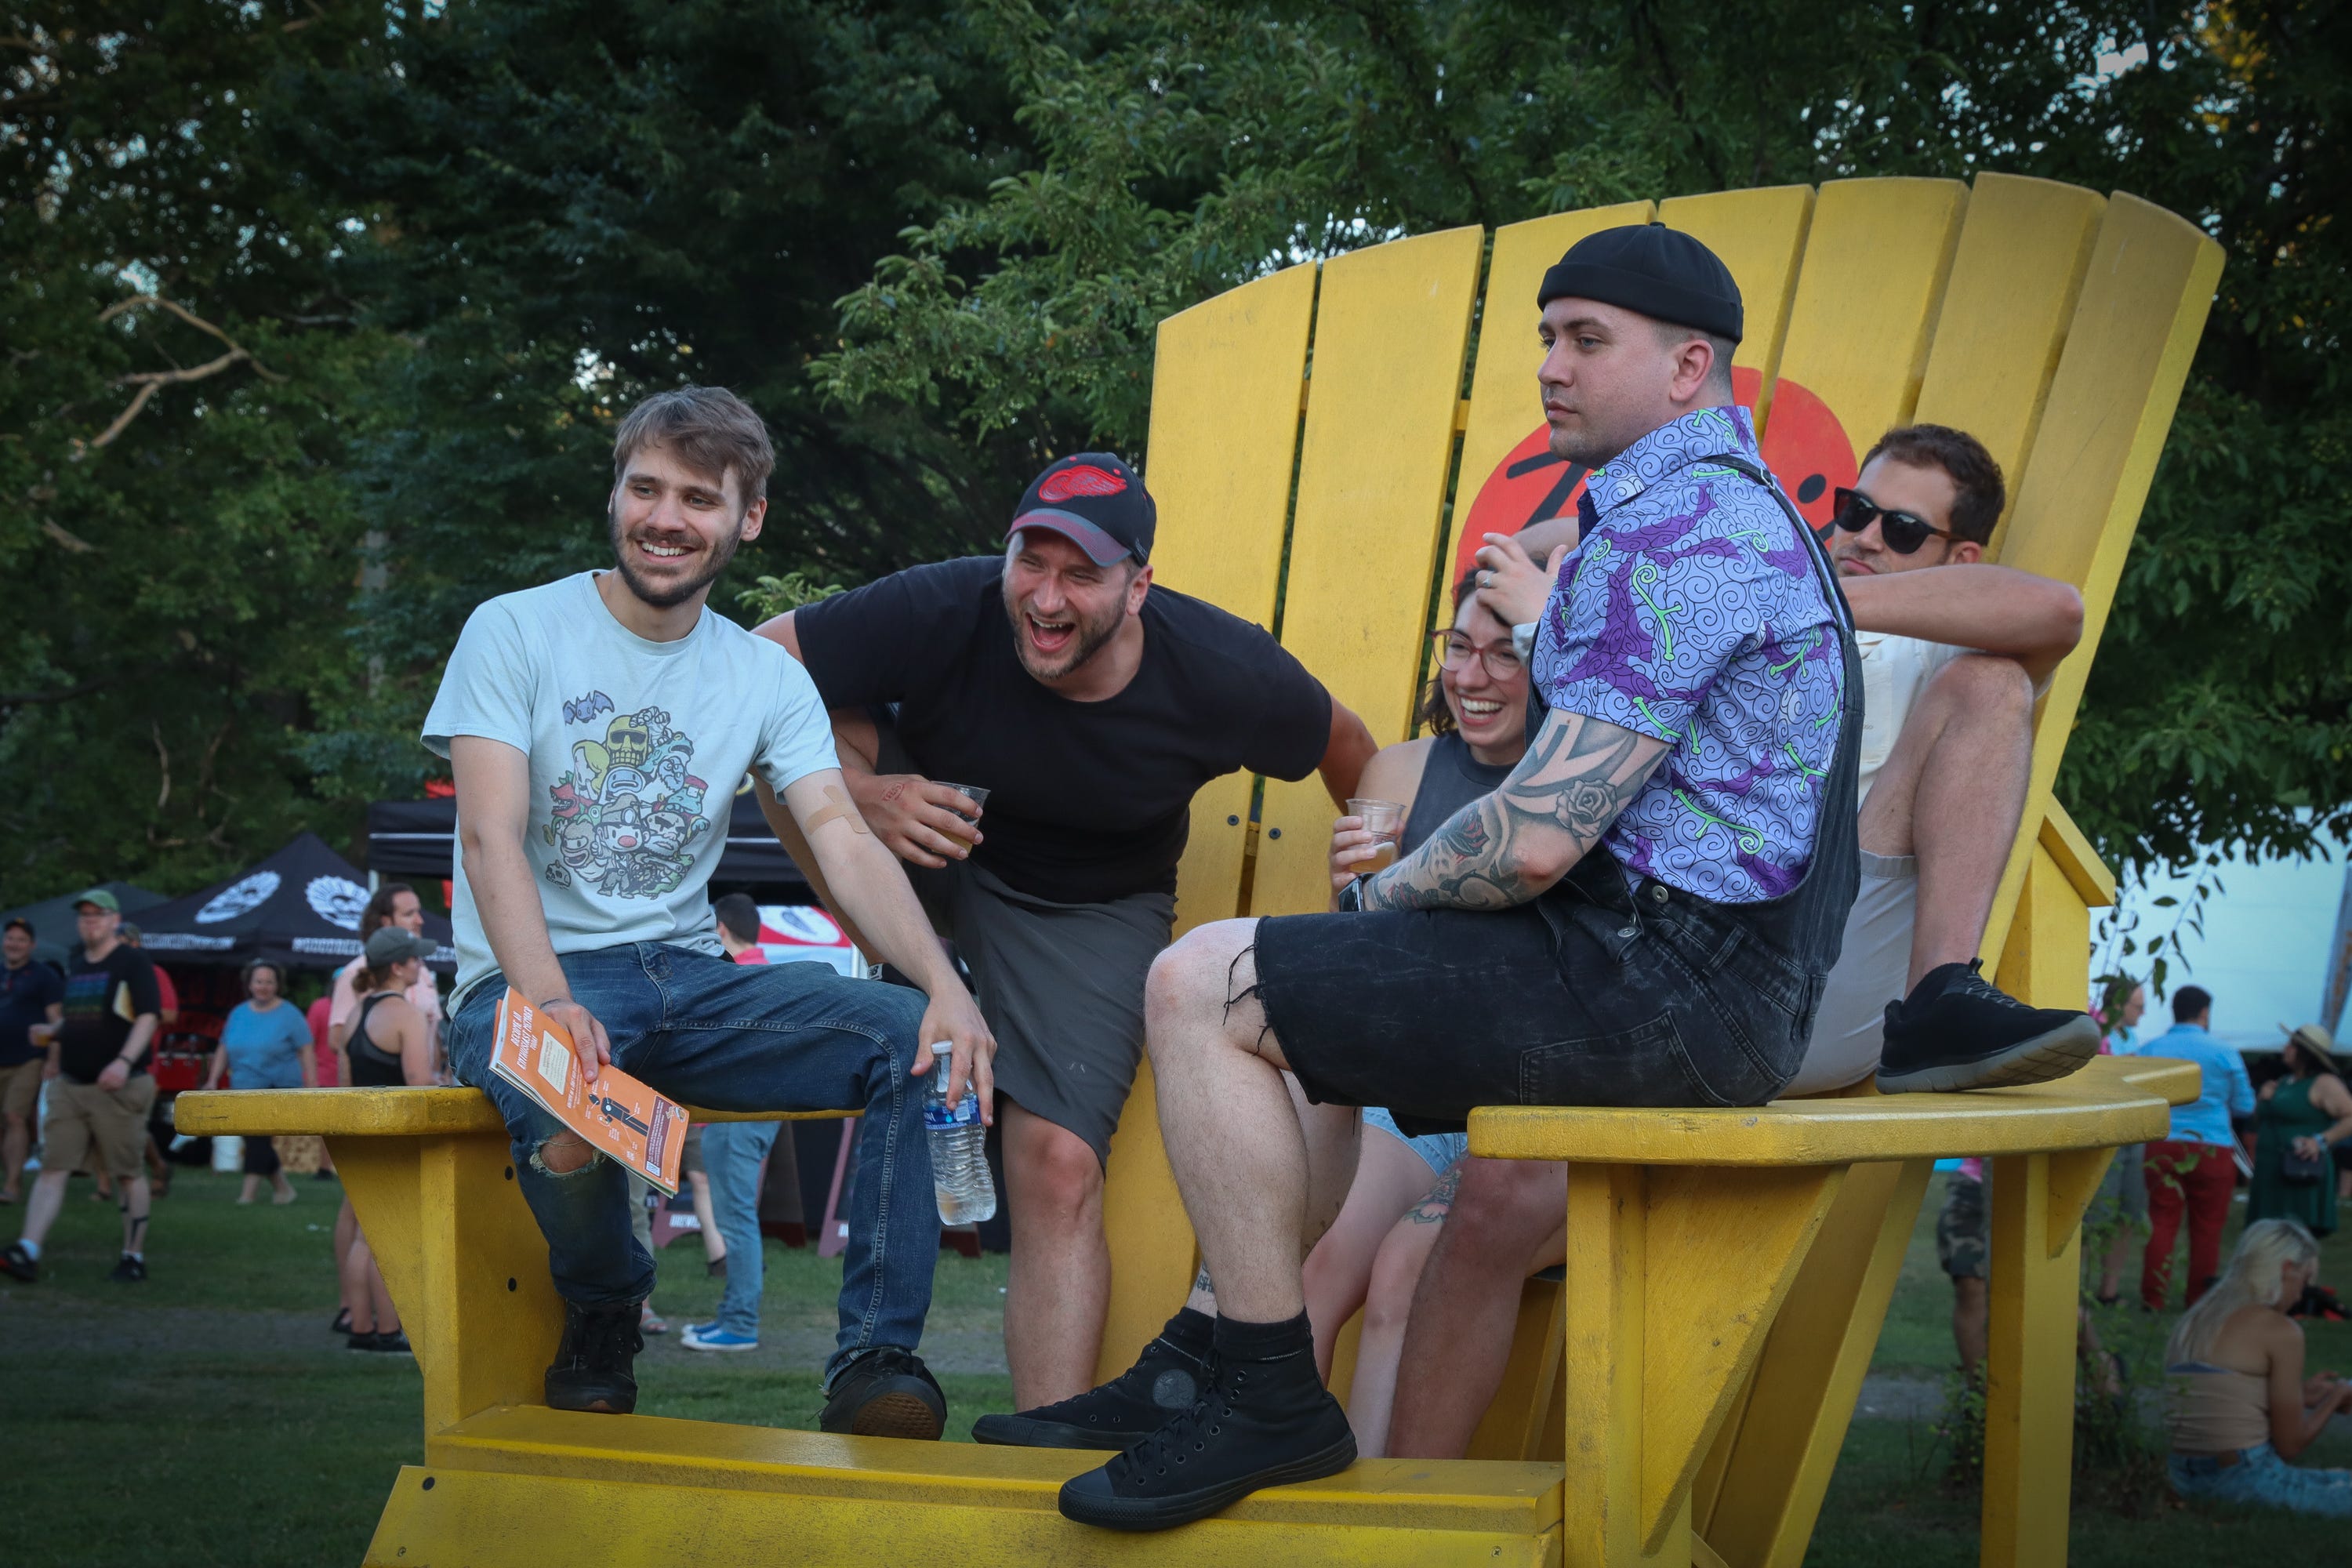 Left to right, Keith Appel, Zac Whalen, Jordan Szpond, David Bladecki, and Nick Szpond pose for a picture on a giant Adirondack chair in Riverside Park at the Summer Beer Festival. All but Bladecki are from Ypsilanti. Bladecki is from Benton Harbor.